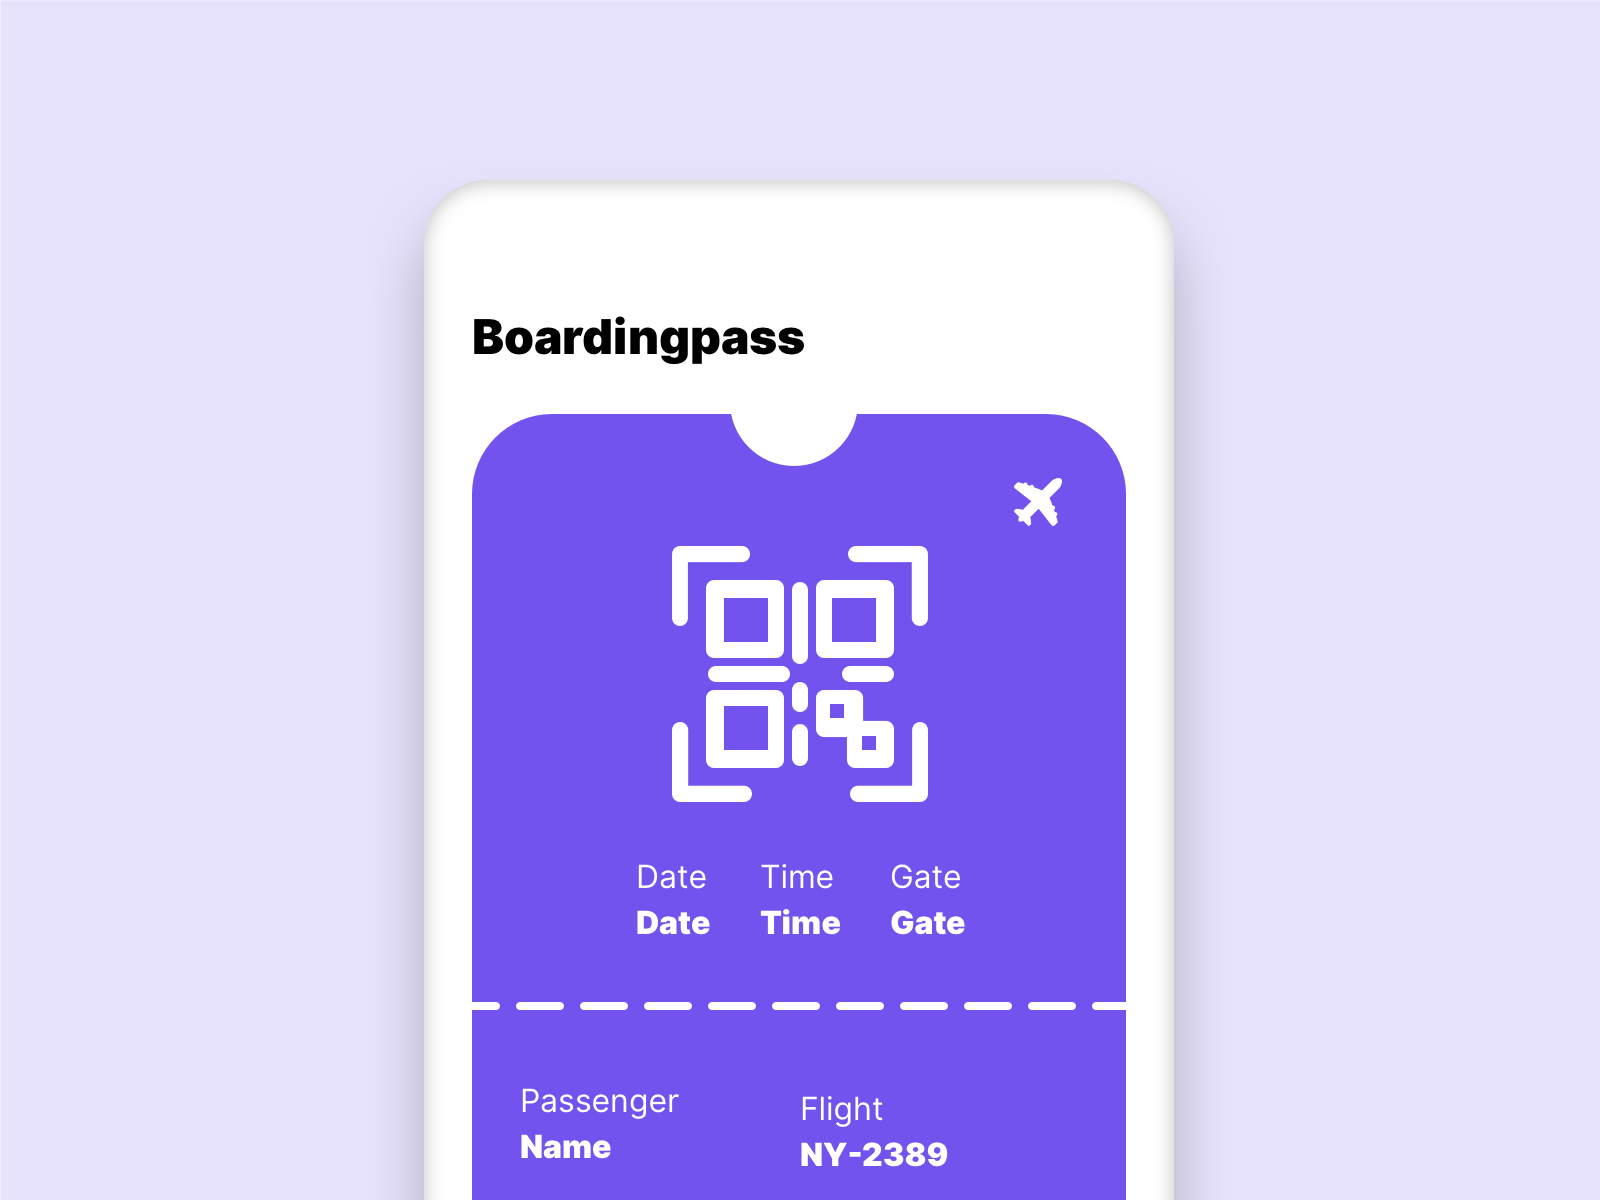 Picture of a boarding pass which was taken over in its appearance from the real world into the interface.